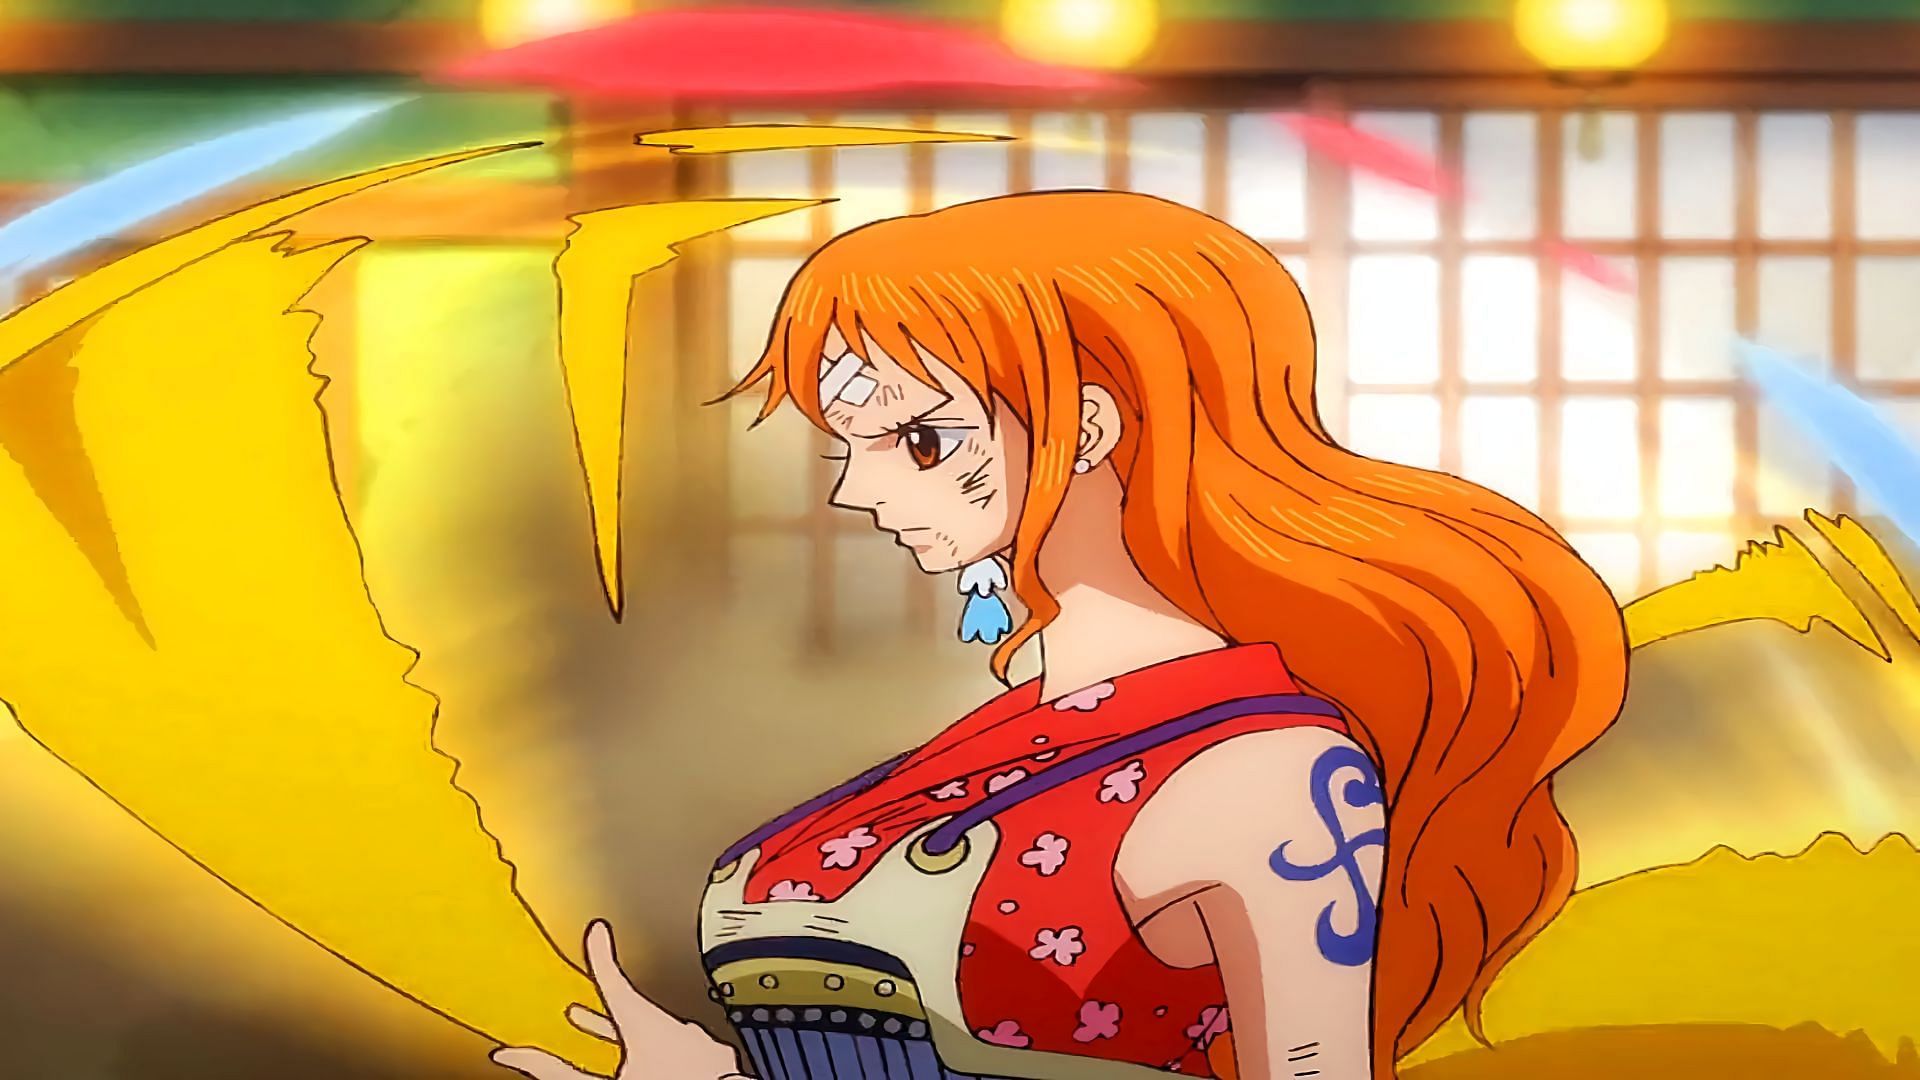 Nami challenges Ulti at the risk of her life and to save her friends! 🏴‍☠️ Episode 1002 of One Piece premieres tonight on @crunchyroll and …